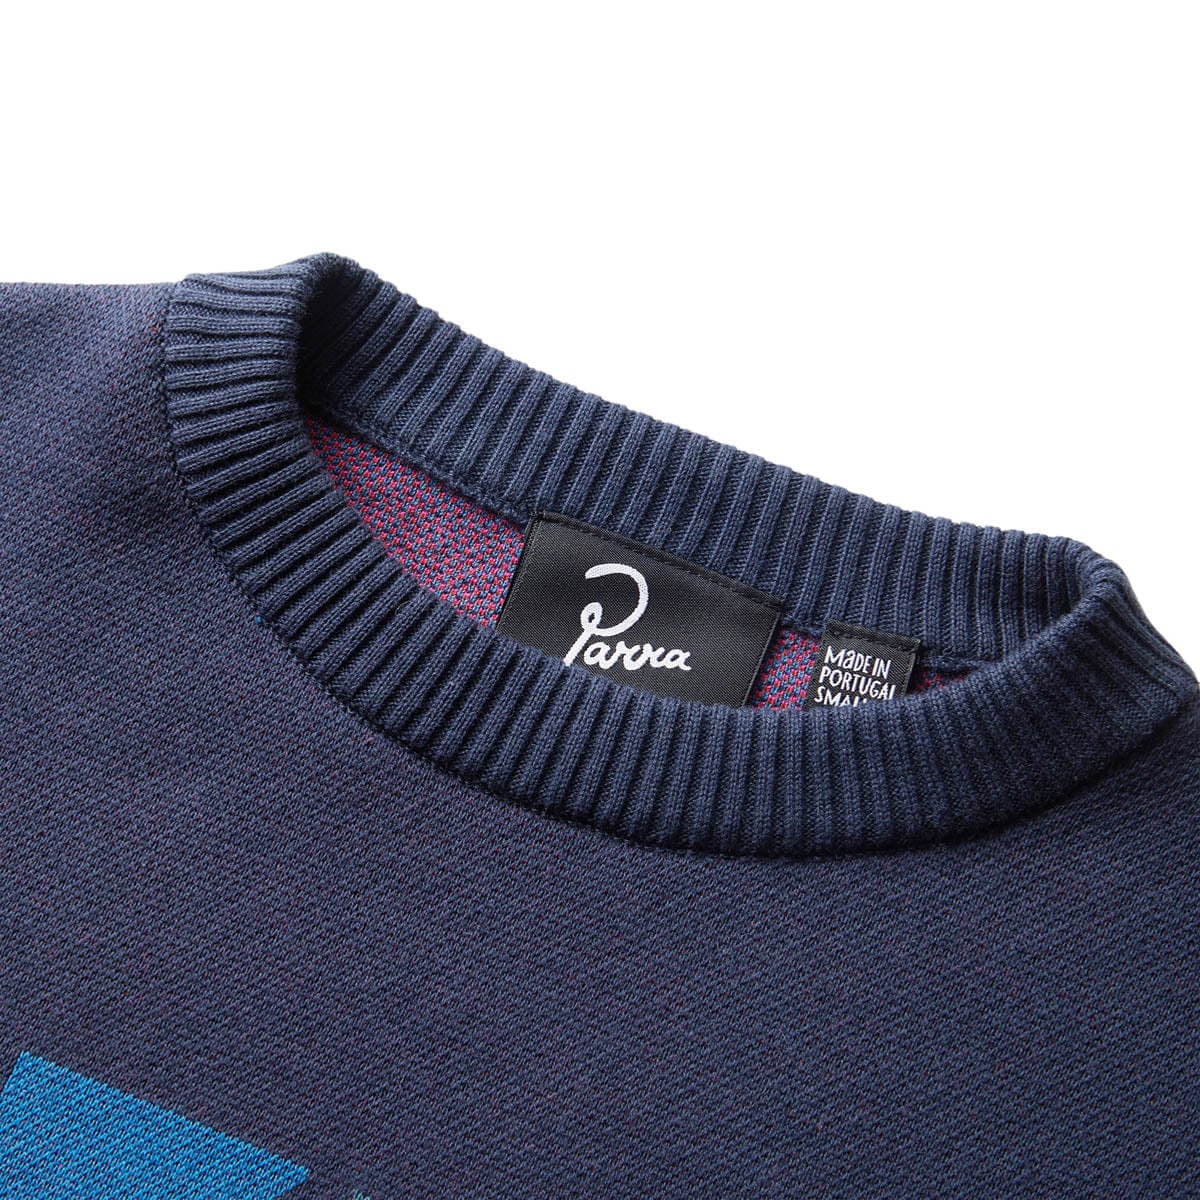 By Parra Knitwear BLOCKED LANDSCAPE KNITTED PULLOVER